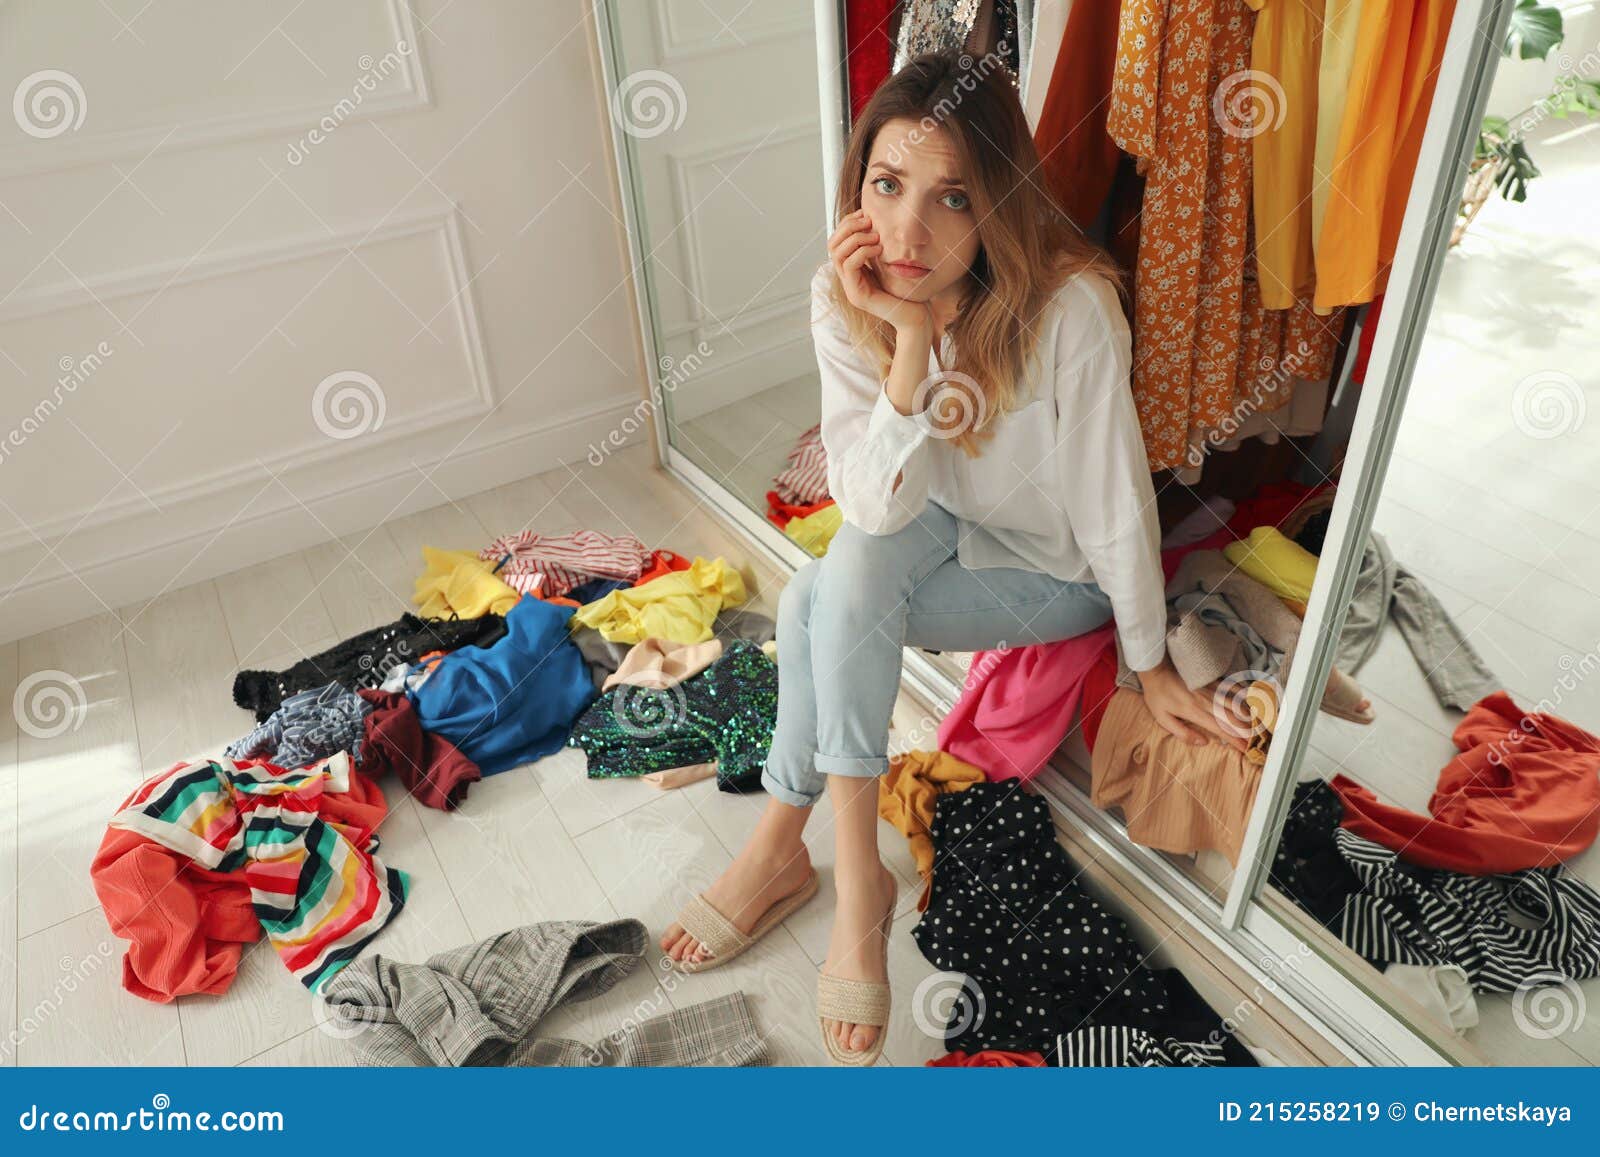 Young Woman Sitting In Wardrobe With Different Clothes Indoors Fast Fashion Concept Stock Image